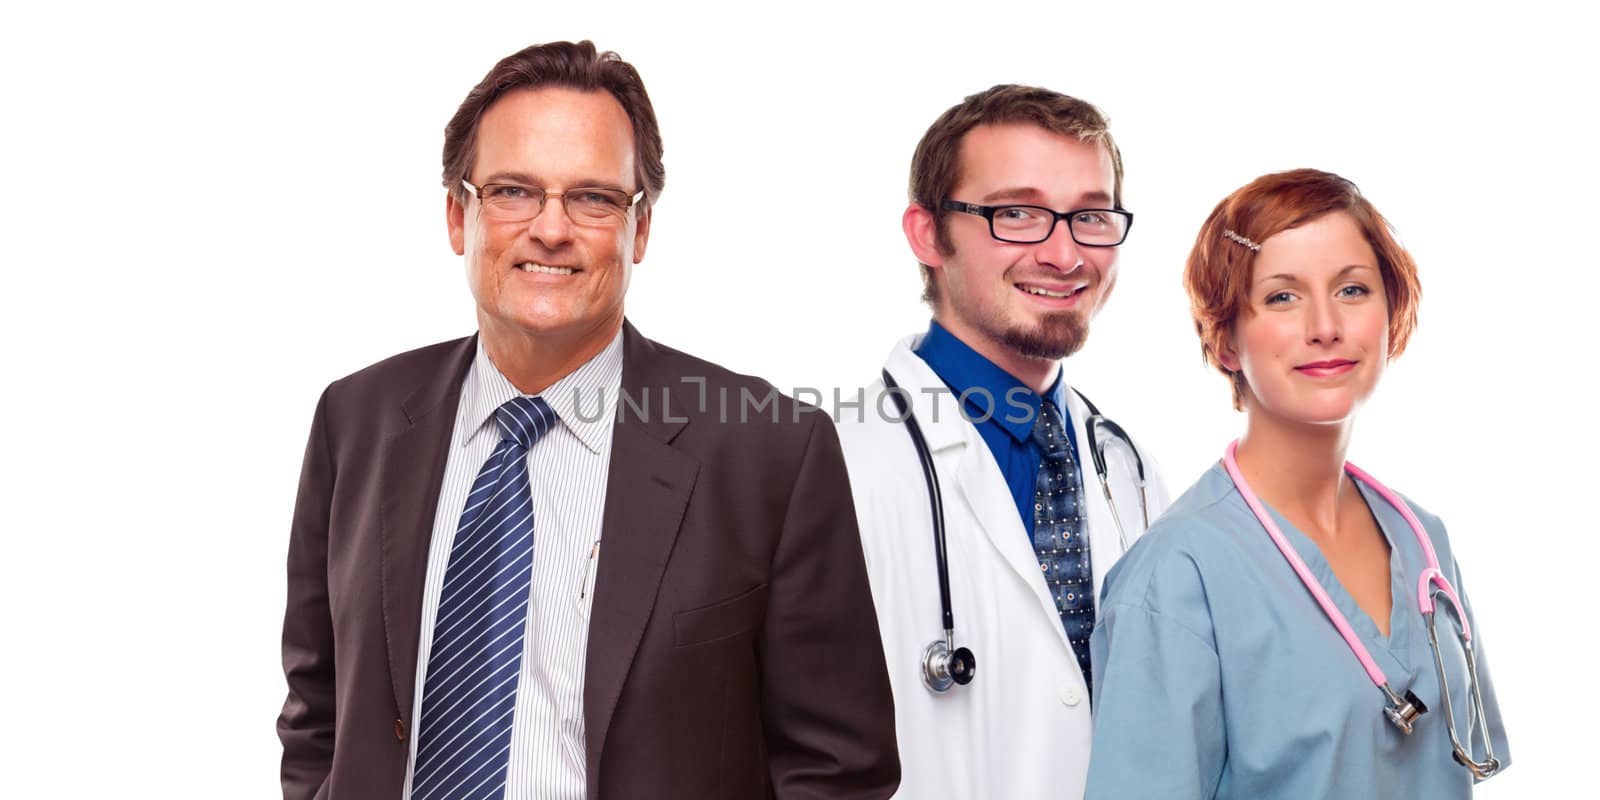 Friendly Male and Female Doctors with Businessman on White  by Feverpitched